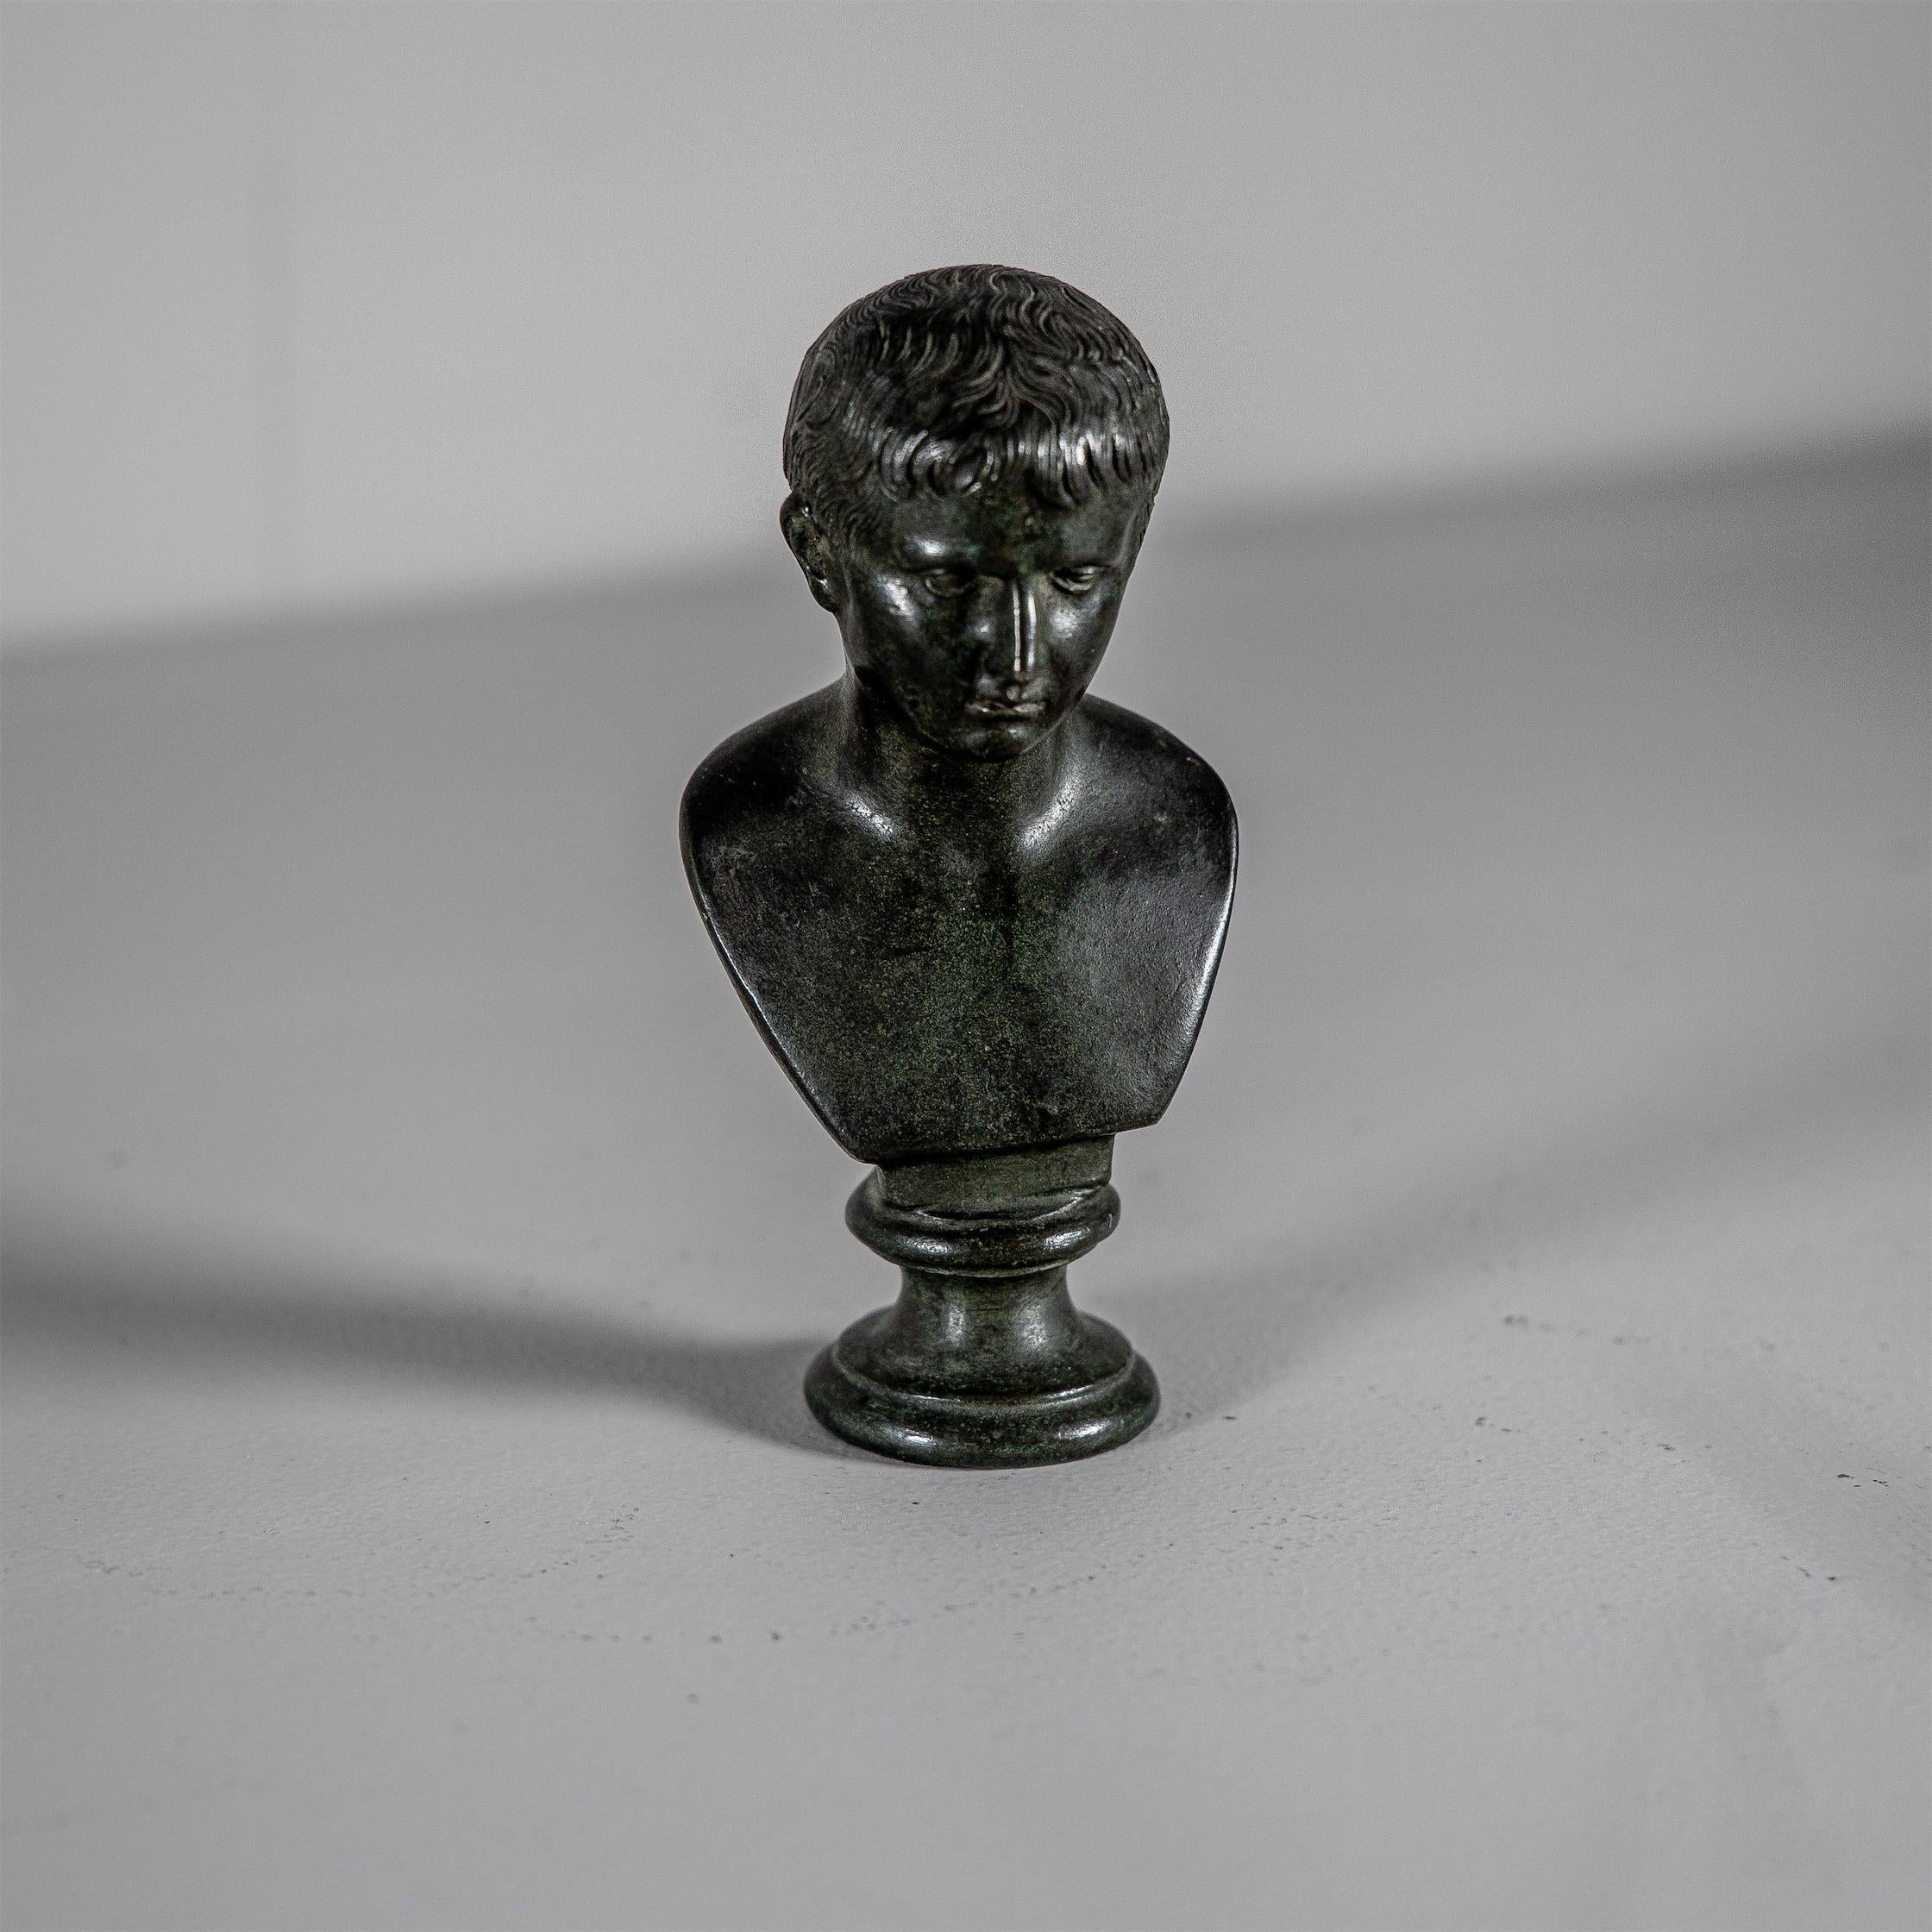 Small bronze bust of young Octavian, later Emperor Augustus and first Roman Emperor.